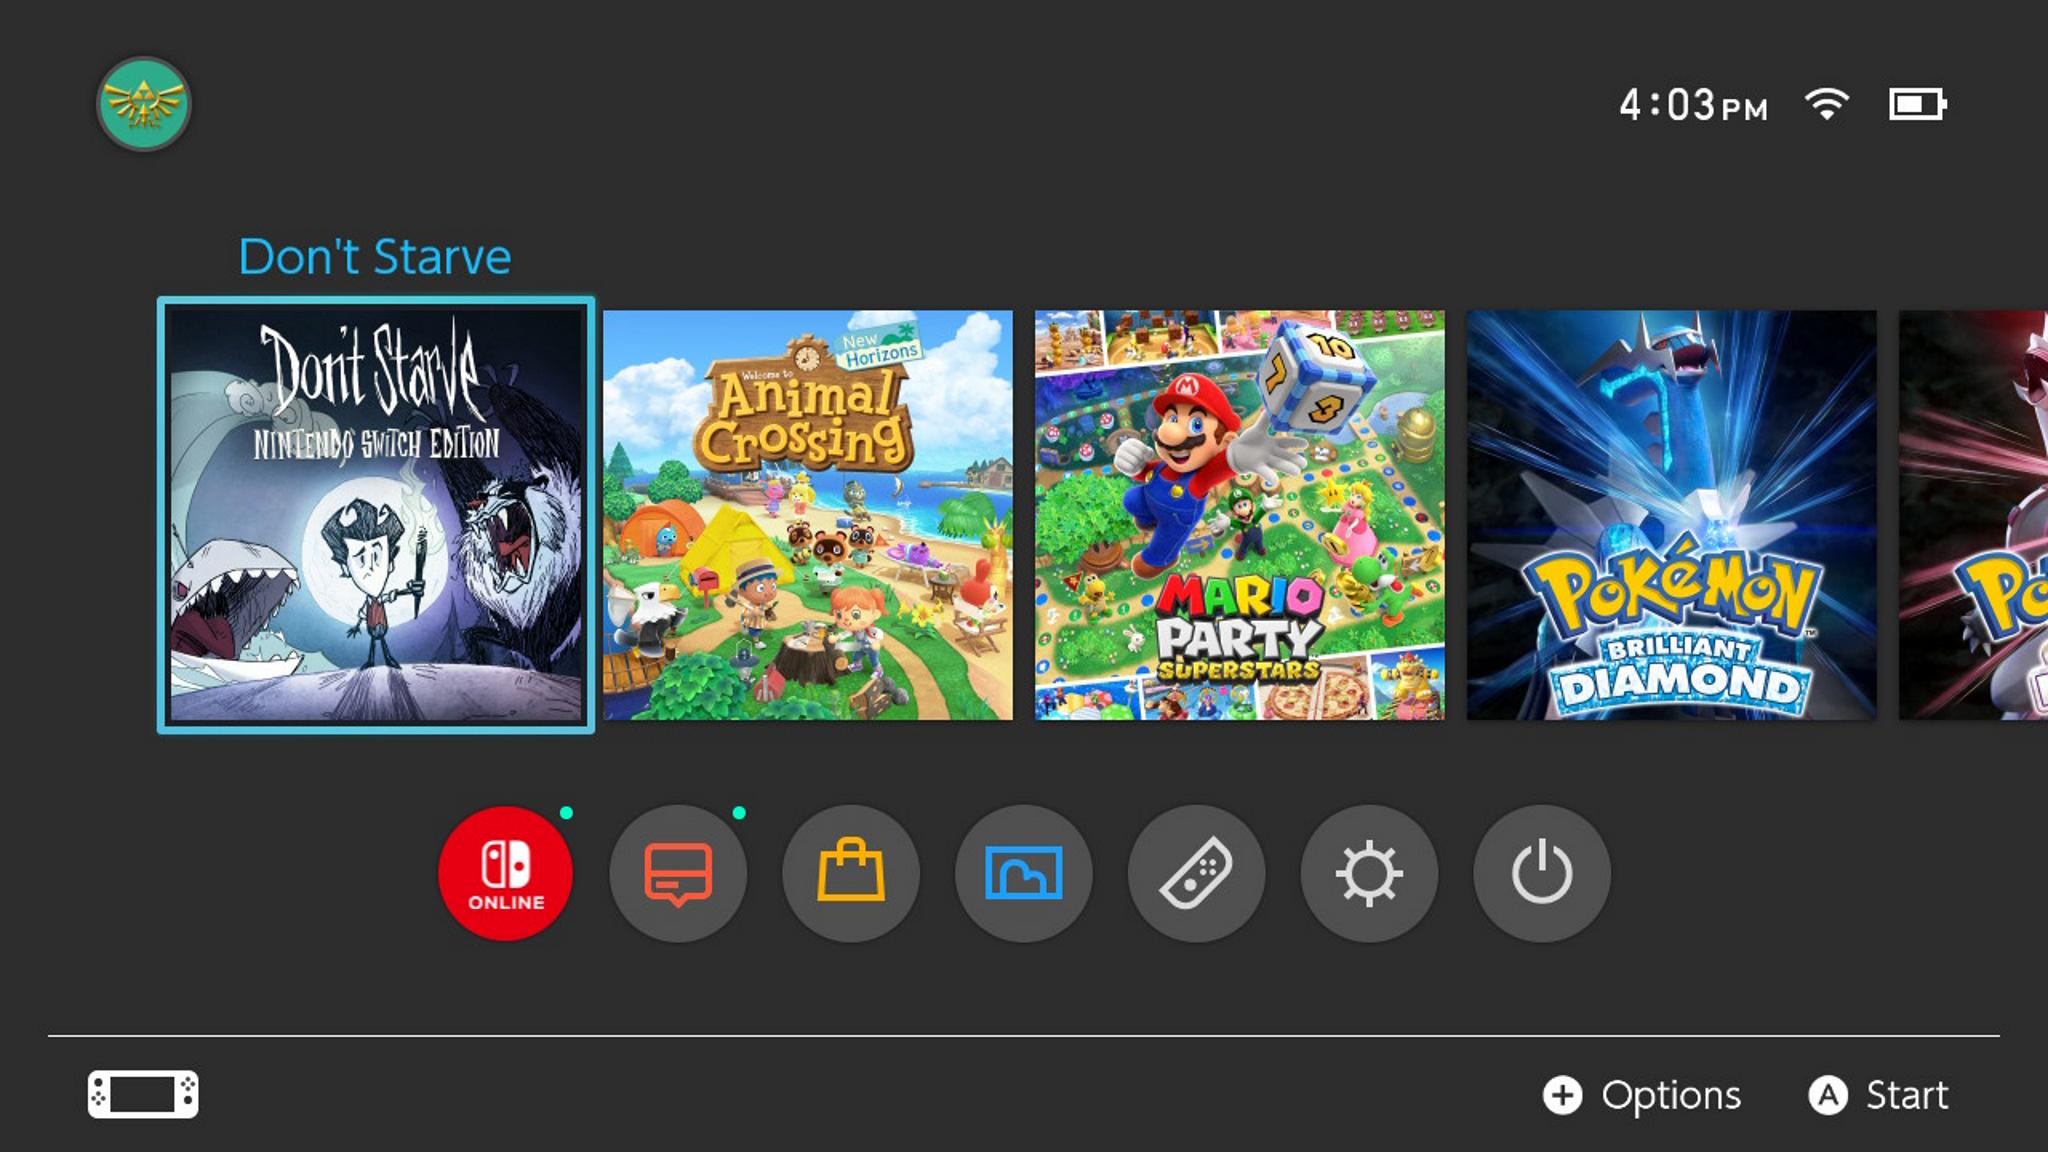 How to play games from one Nintendo Account with a different profile: Select the game you want to play